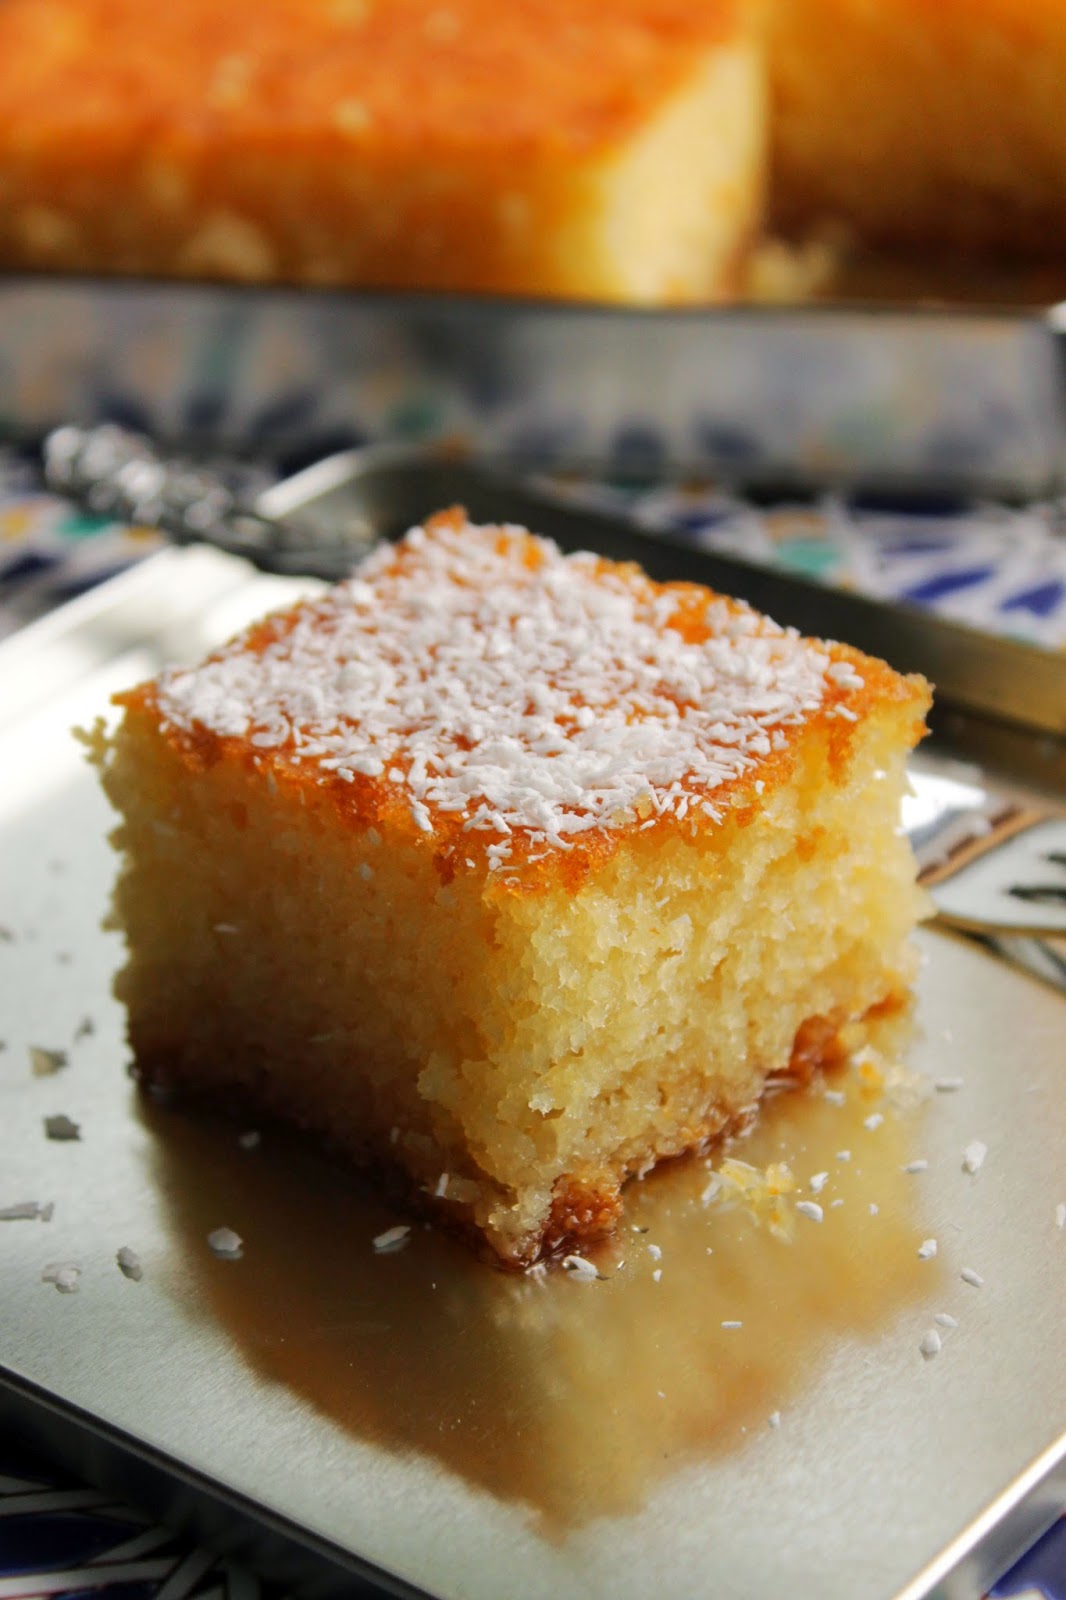 the Old Curiosity Shop: Revani: Turkish Semolina Cake Soaked in Syrup